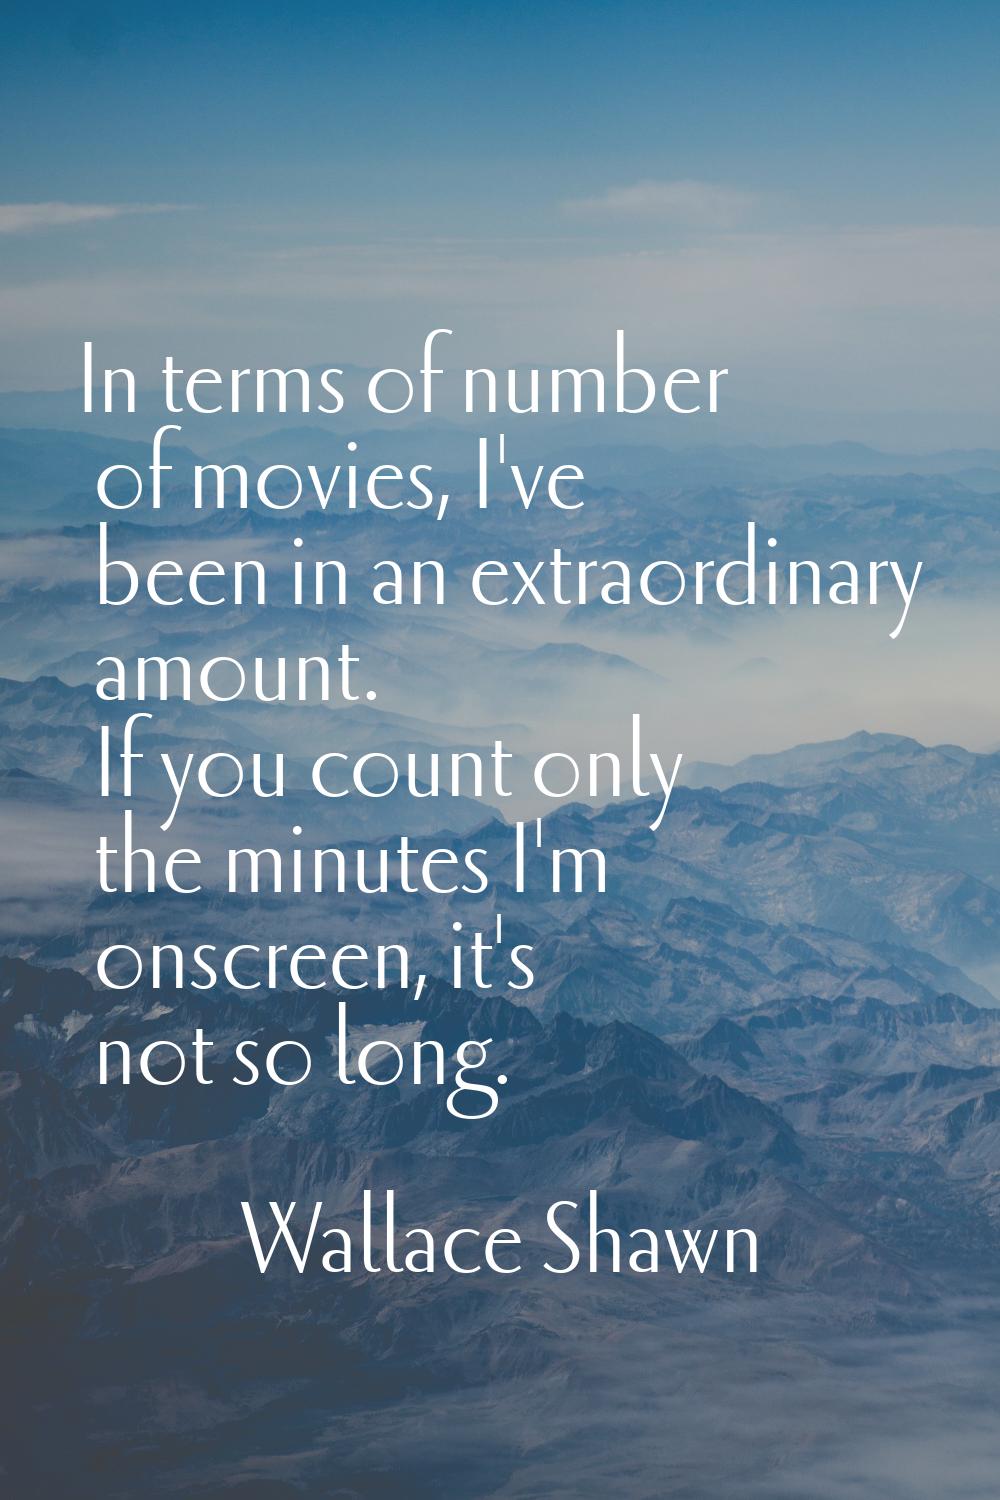 In terms of number of movies, I've been in an extraordinary amount. If you count only the minutes I